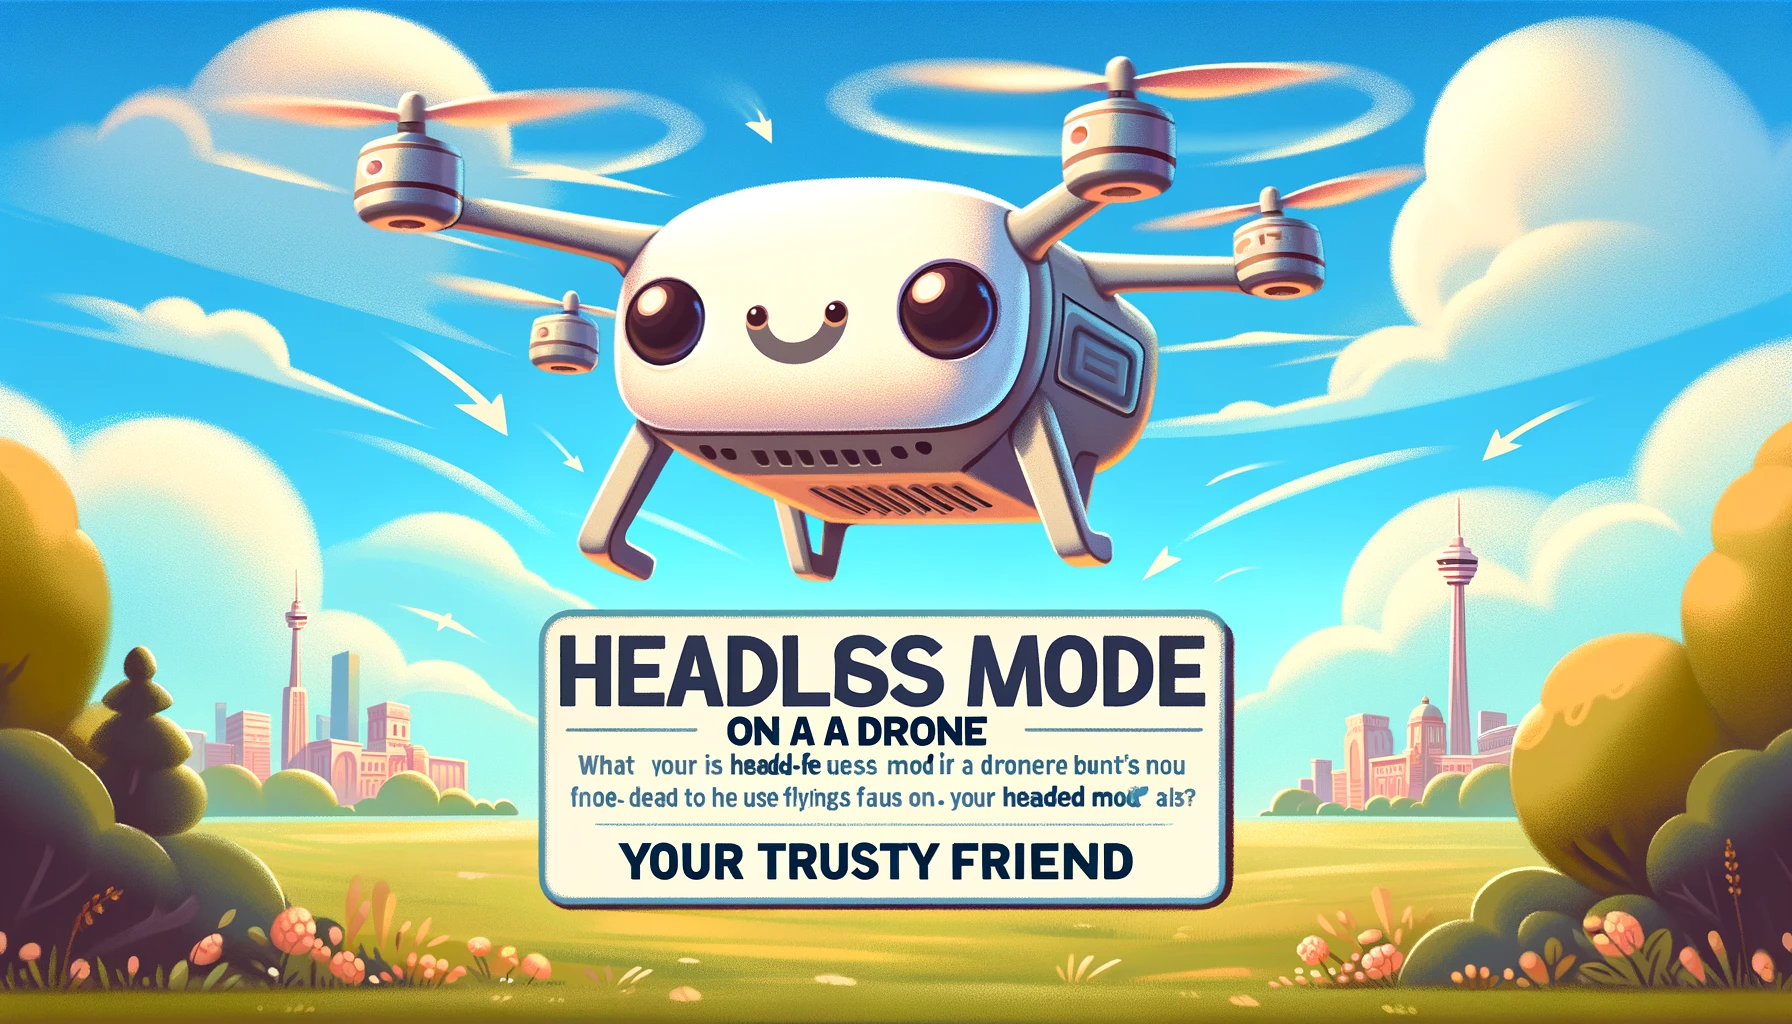 What Is Headless Mode On A Drone Your Trusty Friend